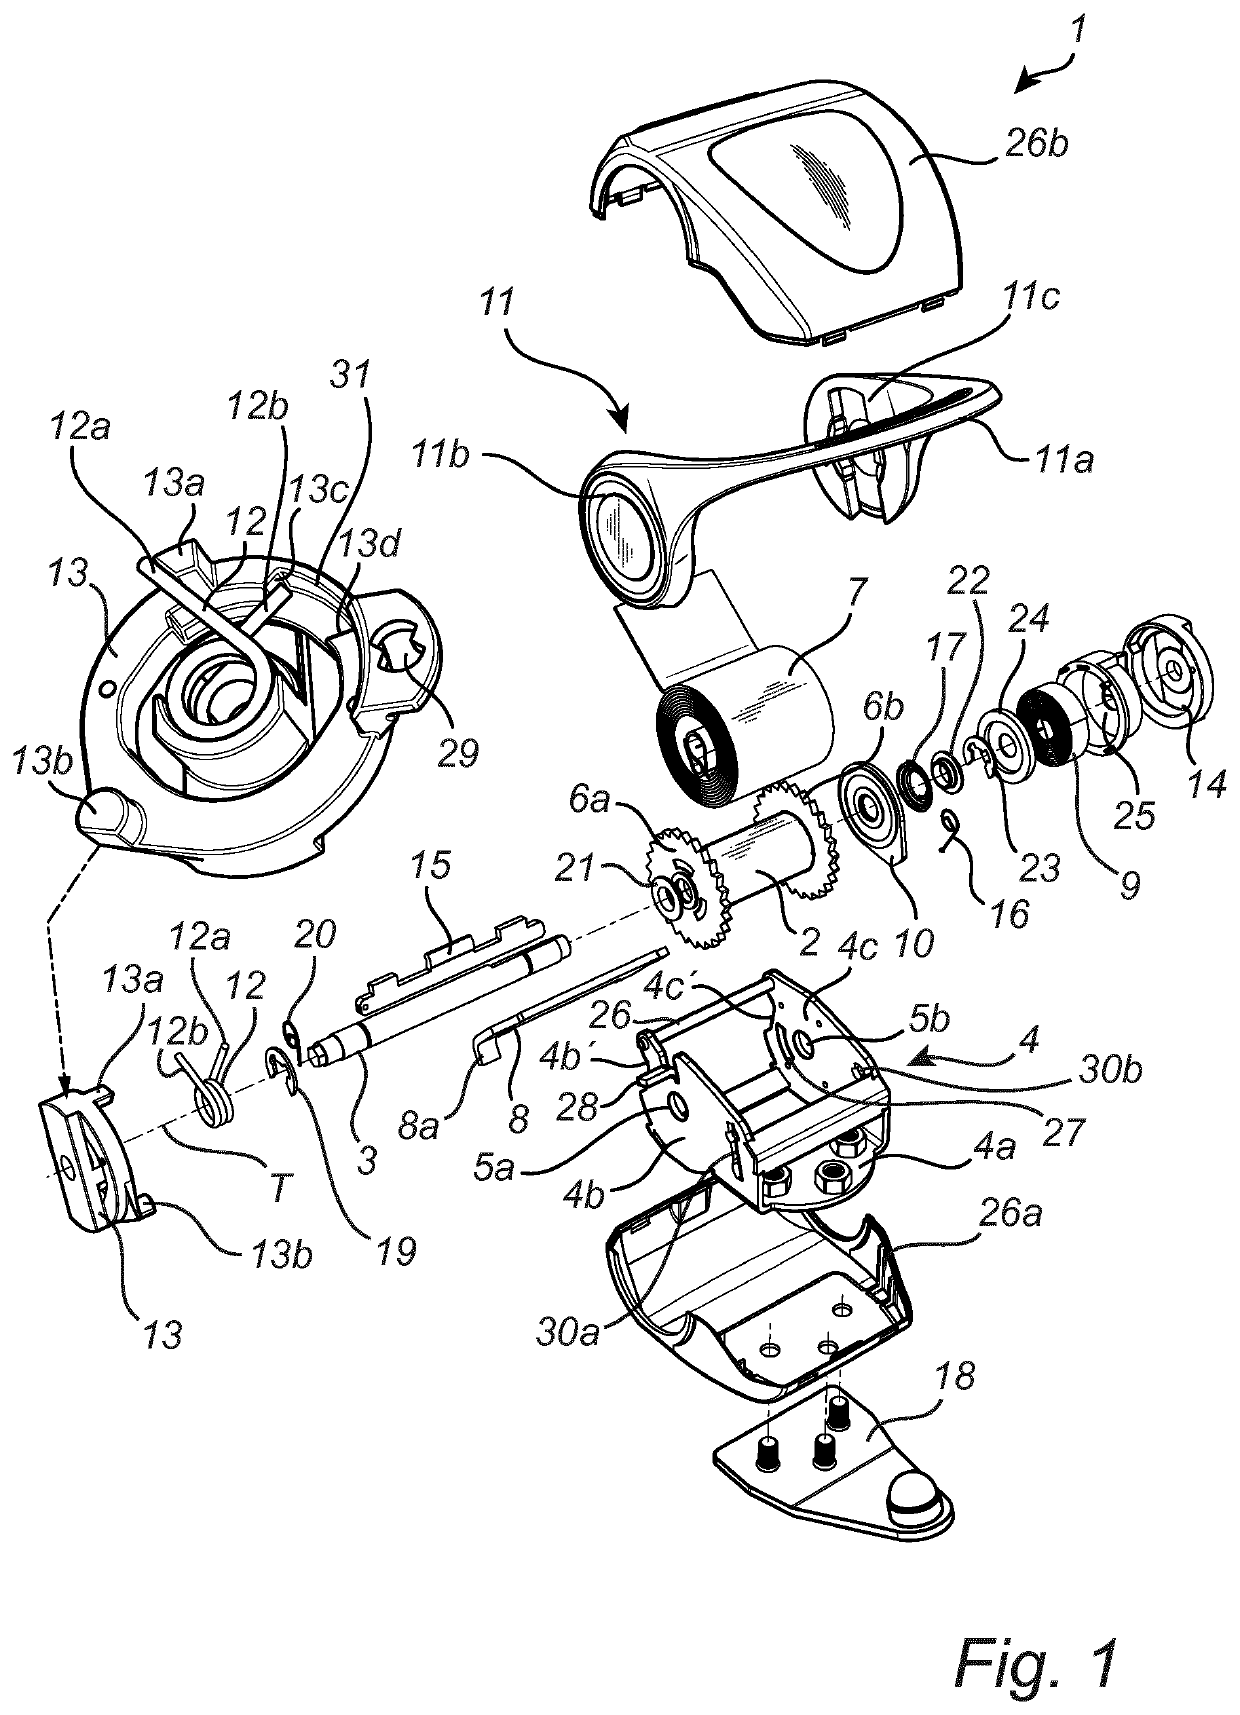 Fastening device for detachably fastening of an object to a vehicle floor